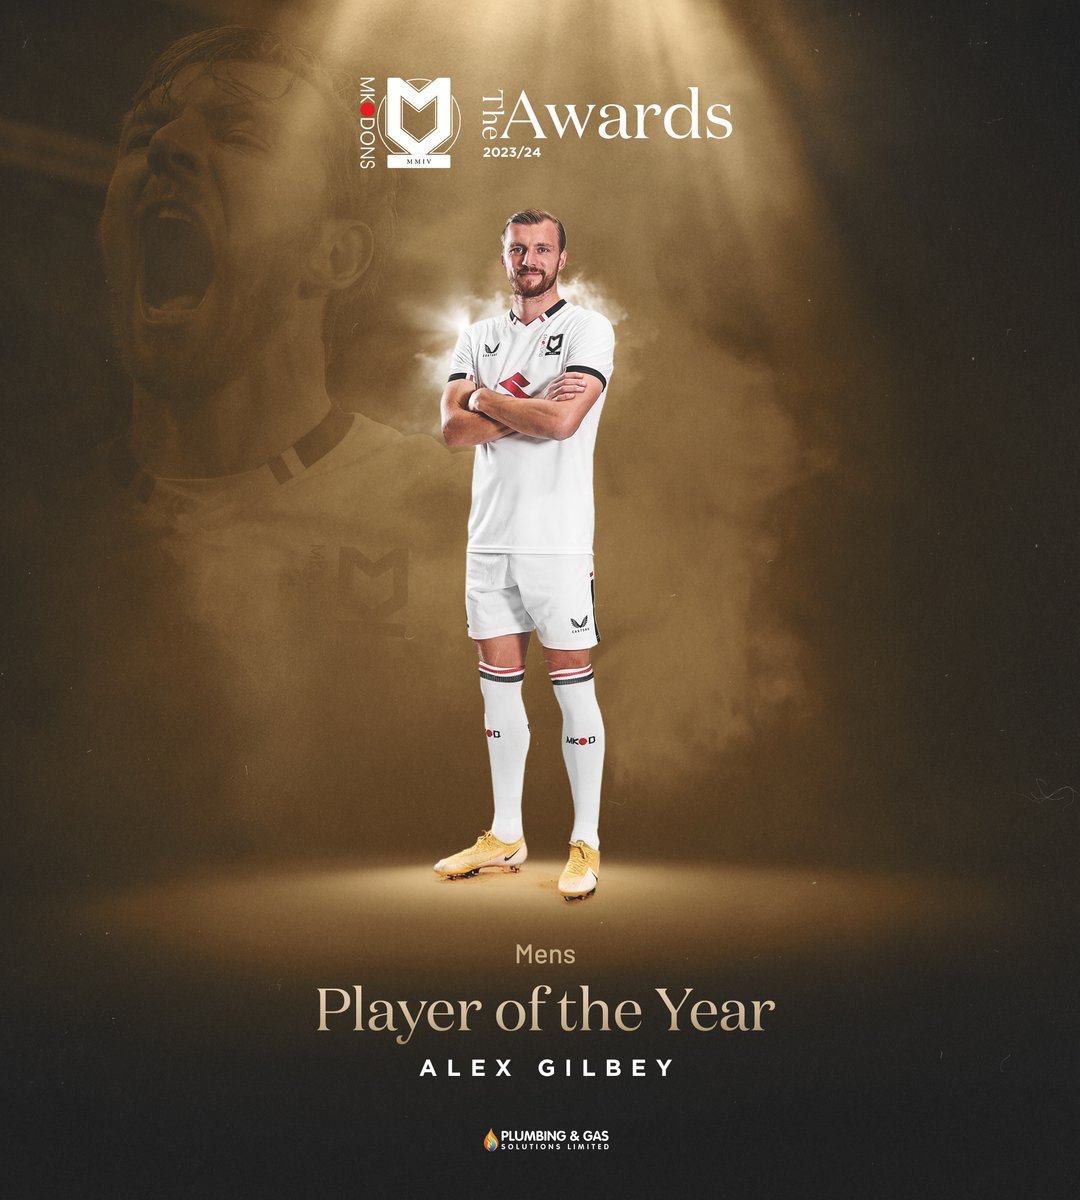 Your 2023/24 #MKDons Player of the Year, sponsored by @PGSolutionsltd is… ALEX GILBEY!! Congratulations, @agilbey8! 👏